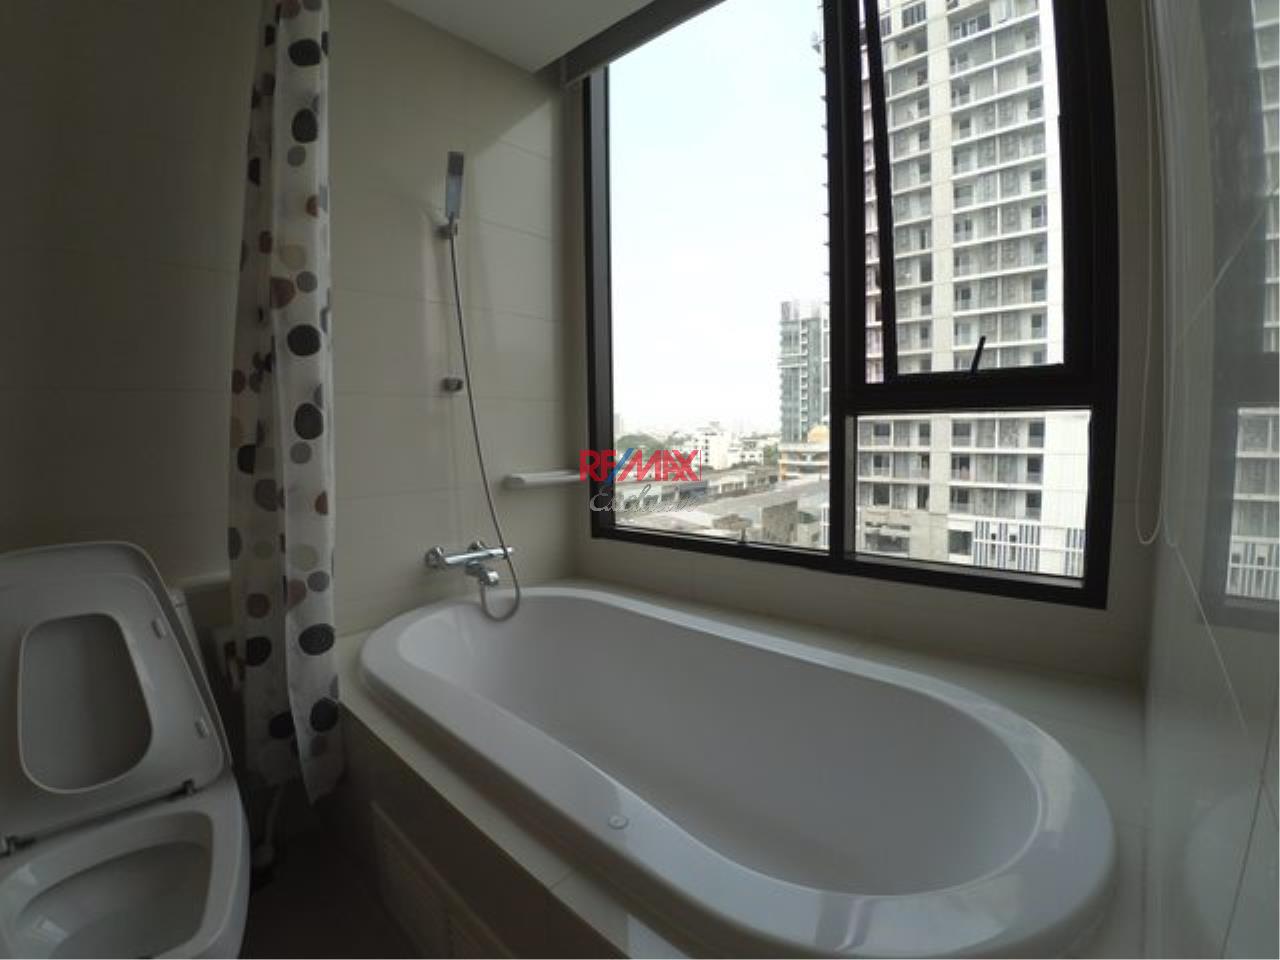 RE/MAX Exclusive Agency's THE ALCOVE, Thonglor 10, 44 Sqm., 1 Bedroom, Fully-Furnished, Fully Equipped Kitchen For RENT !!!! 3